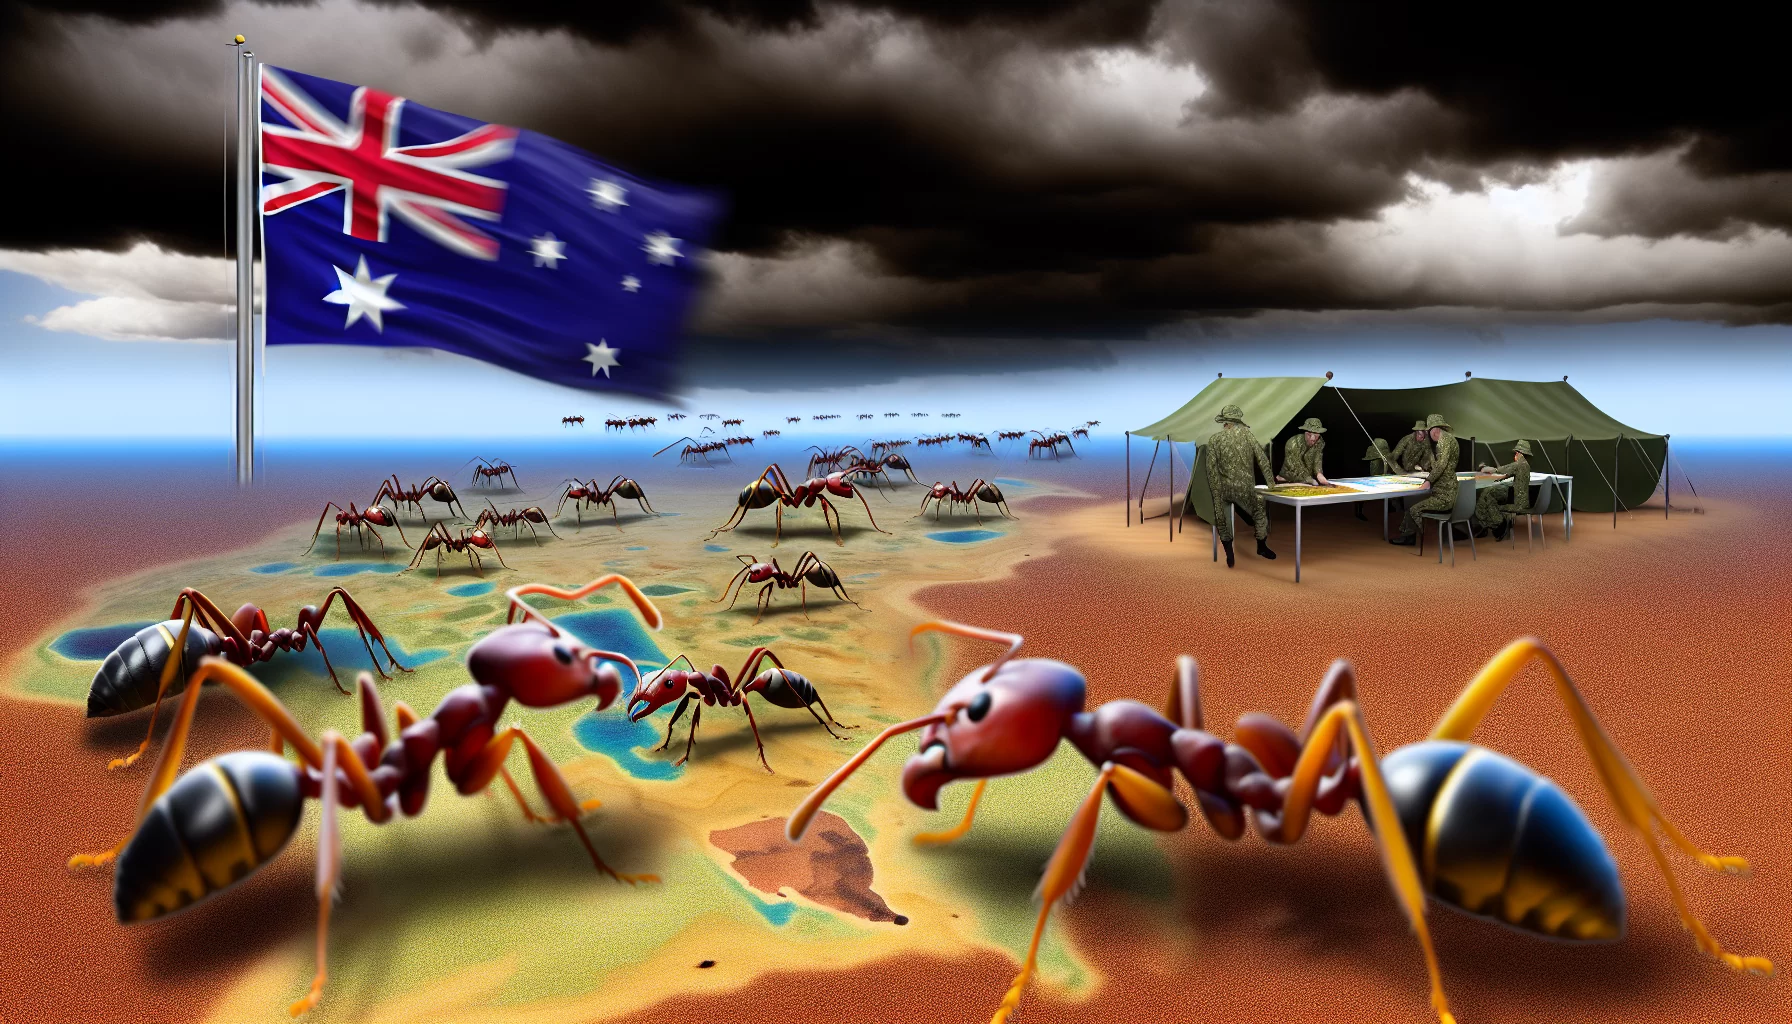 Fire ant invasion threatens Australia's ecosystem and military bases: an urgent call to action